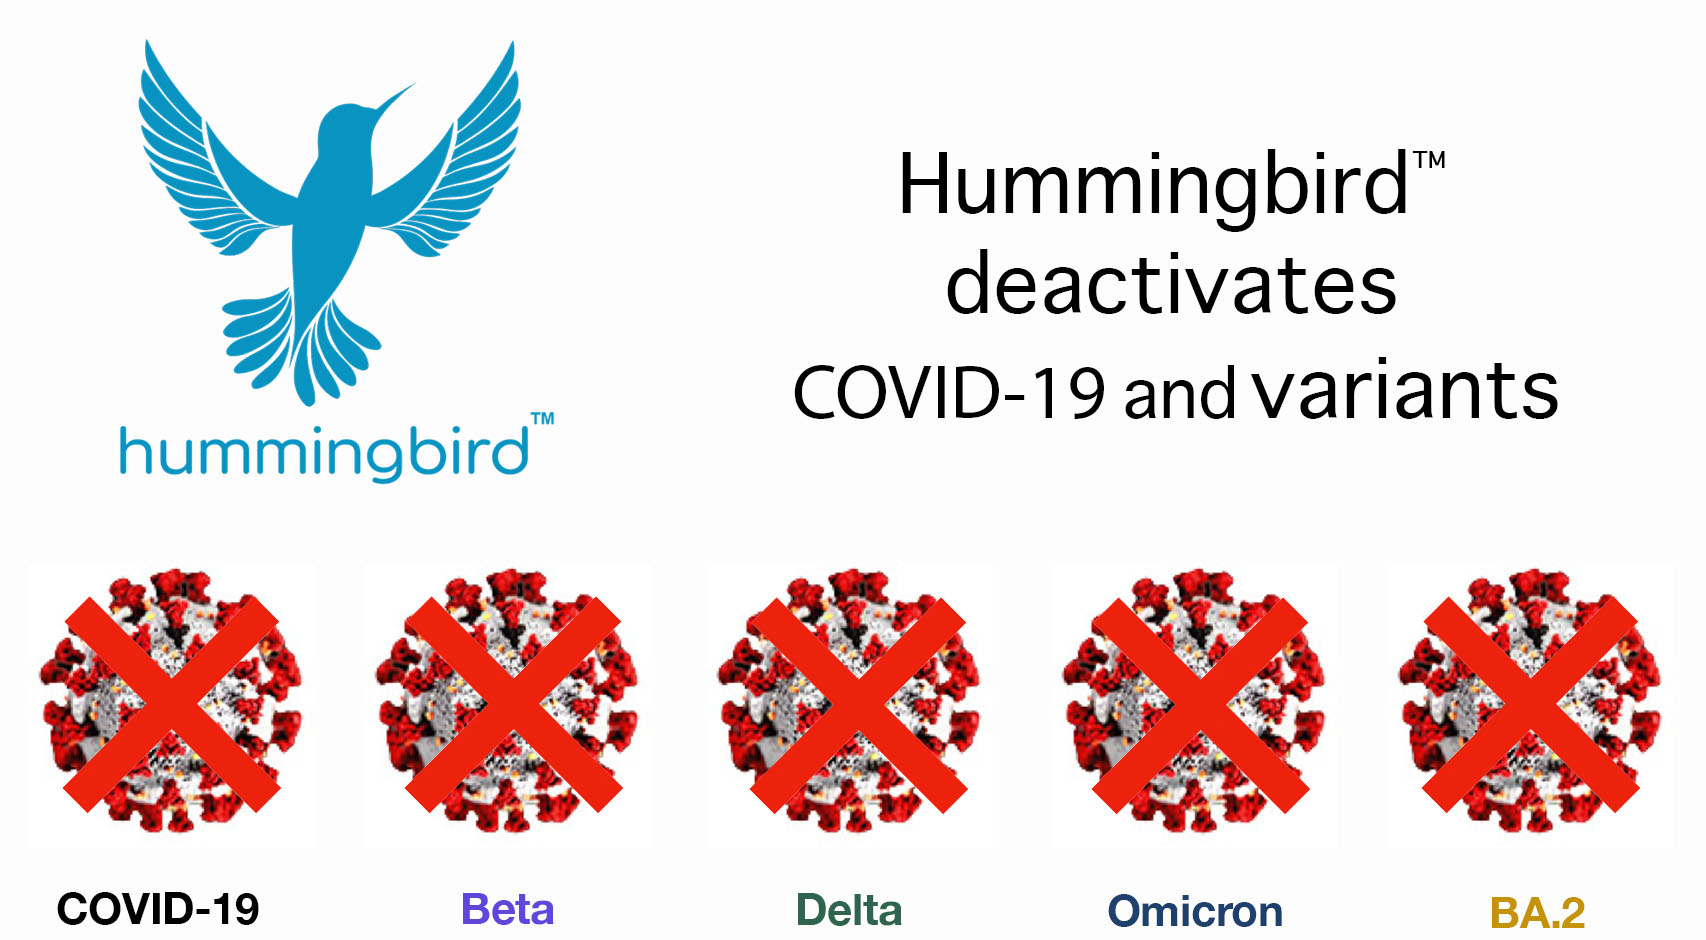 Hummingbird Air Purification, Indoor Air Quality & Management System with air vaccine deactivates Covid-19, Delta & Omicron Variants